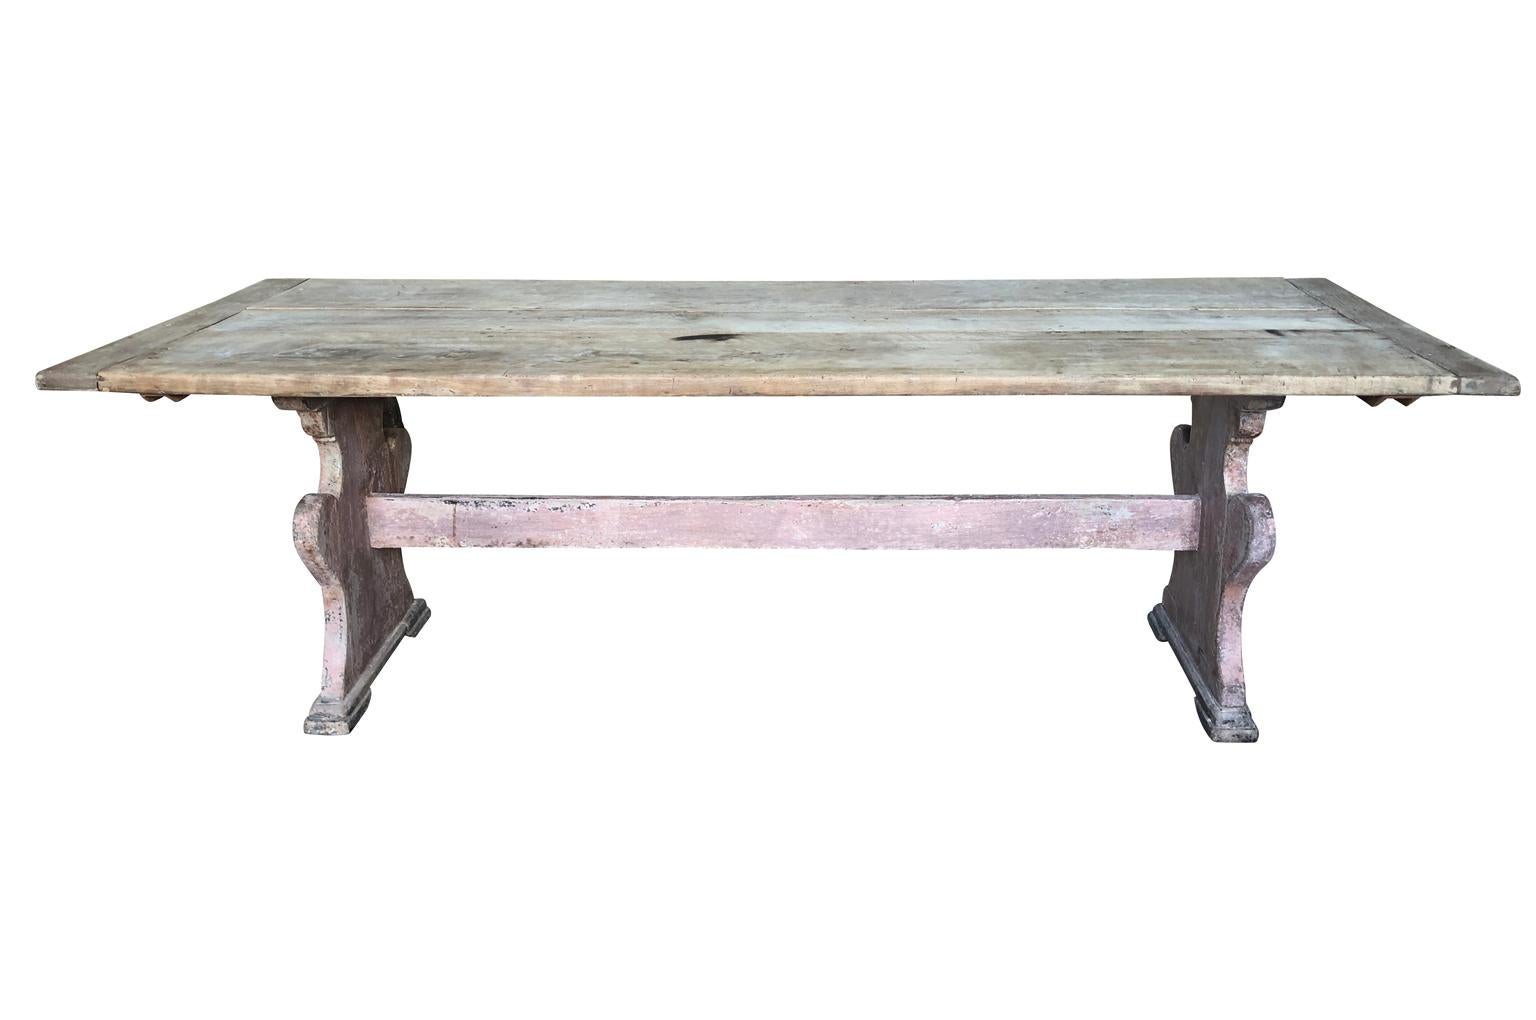 A very beautiful mid-19th century monastery table, trestle table from the Veneto region of Italy. Beautifully and soundly constructed from in washed and painted wood. Wonderful patina and finish.